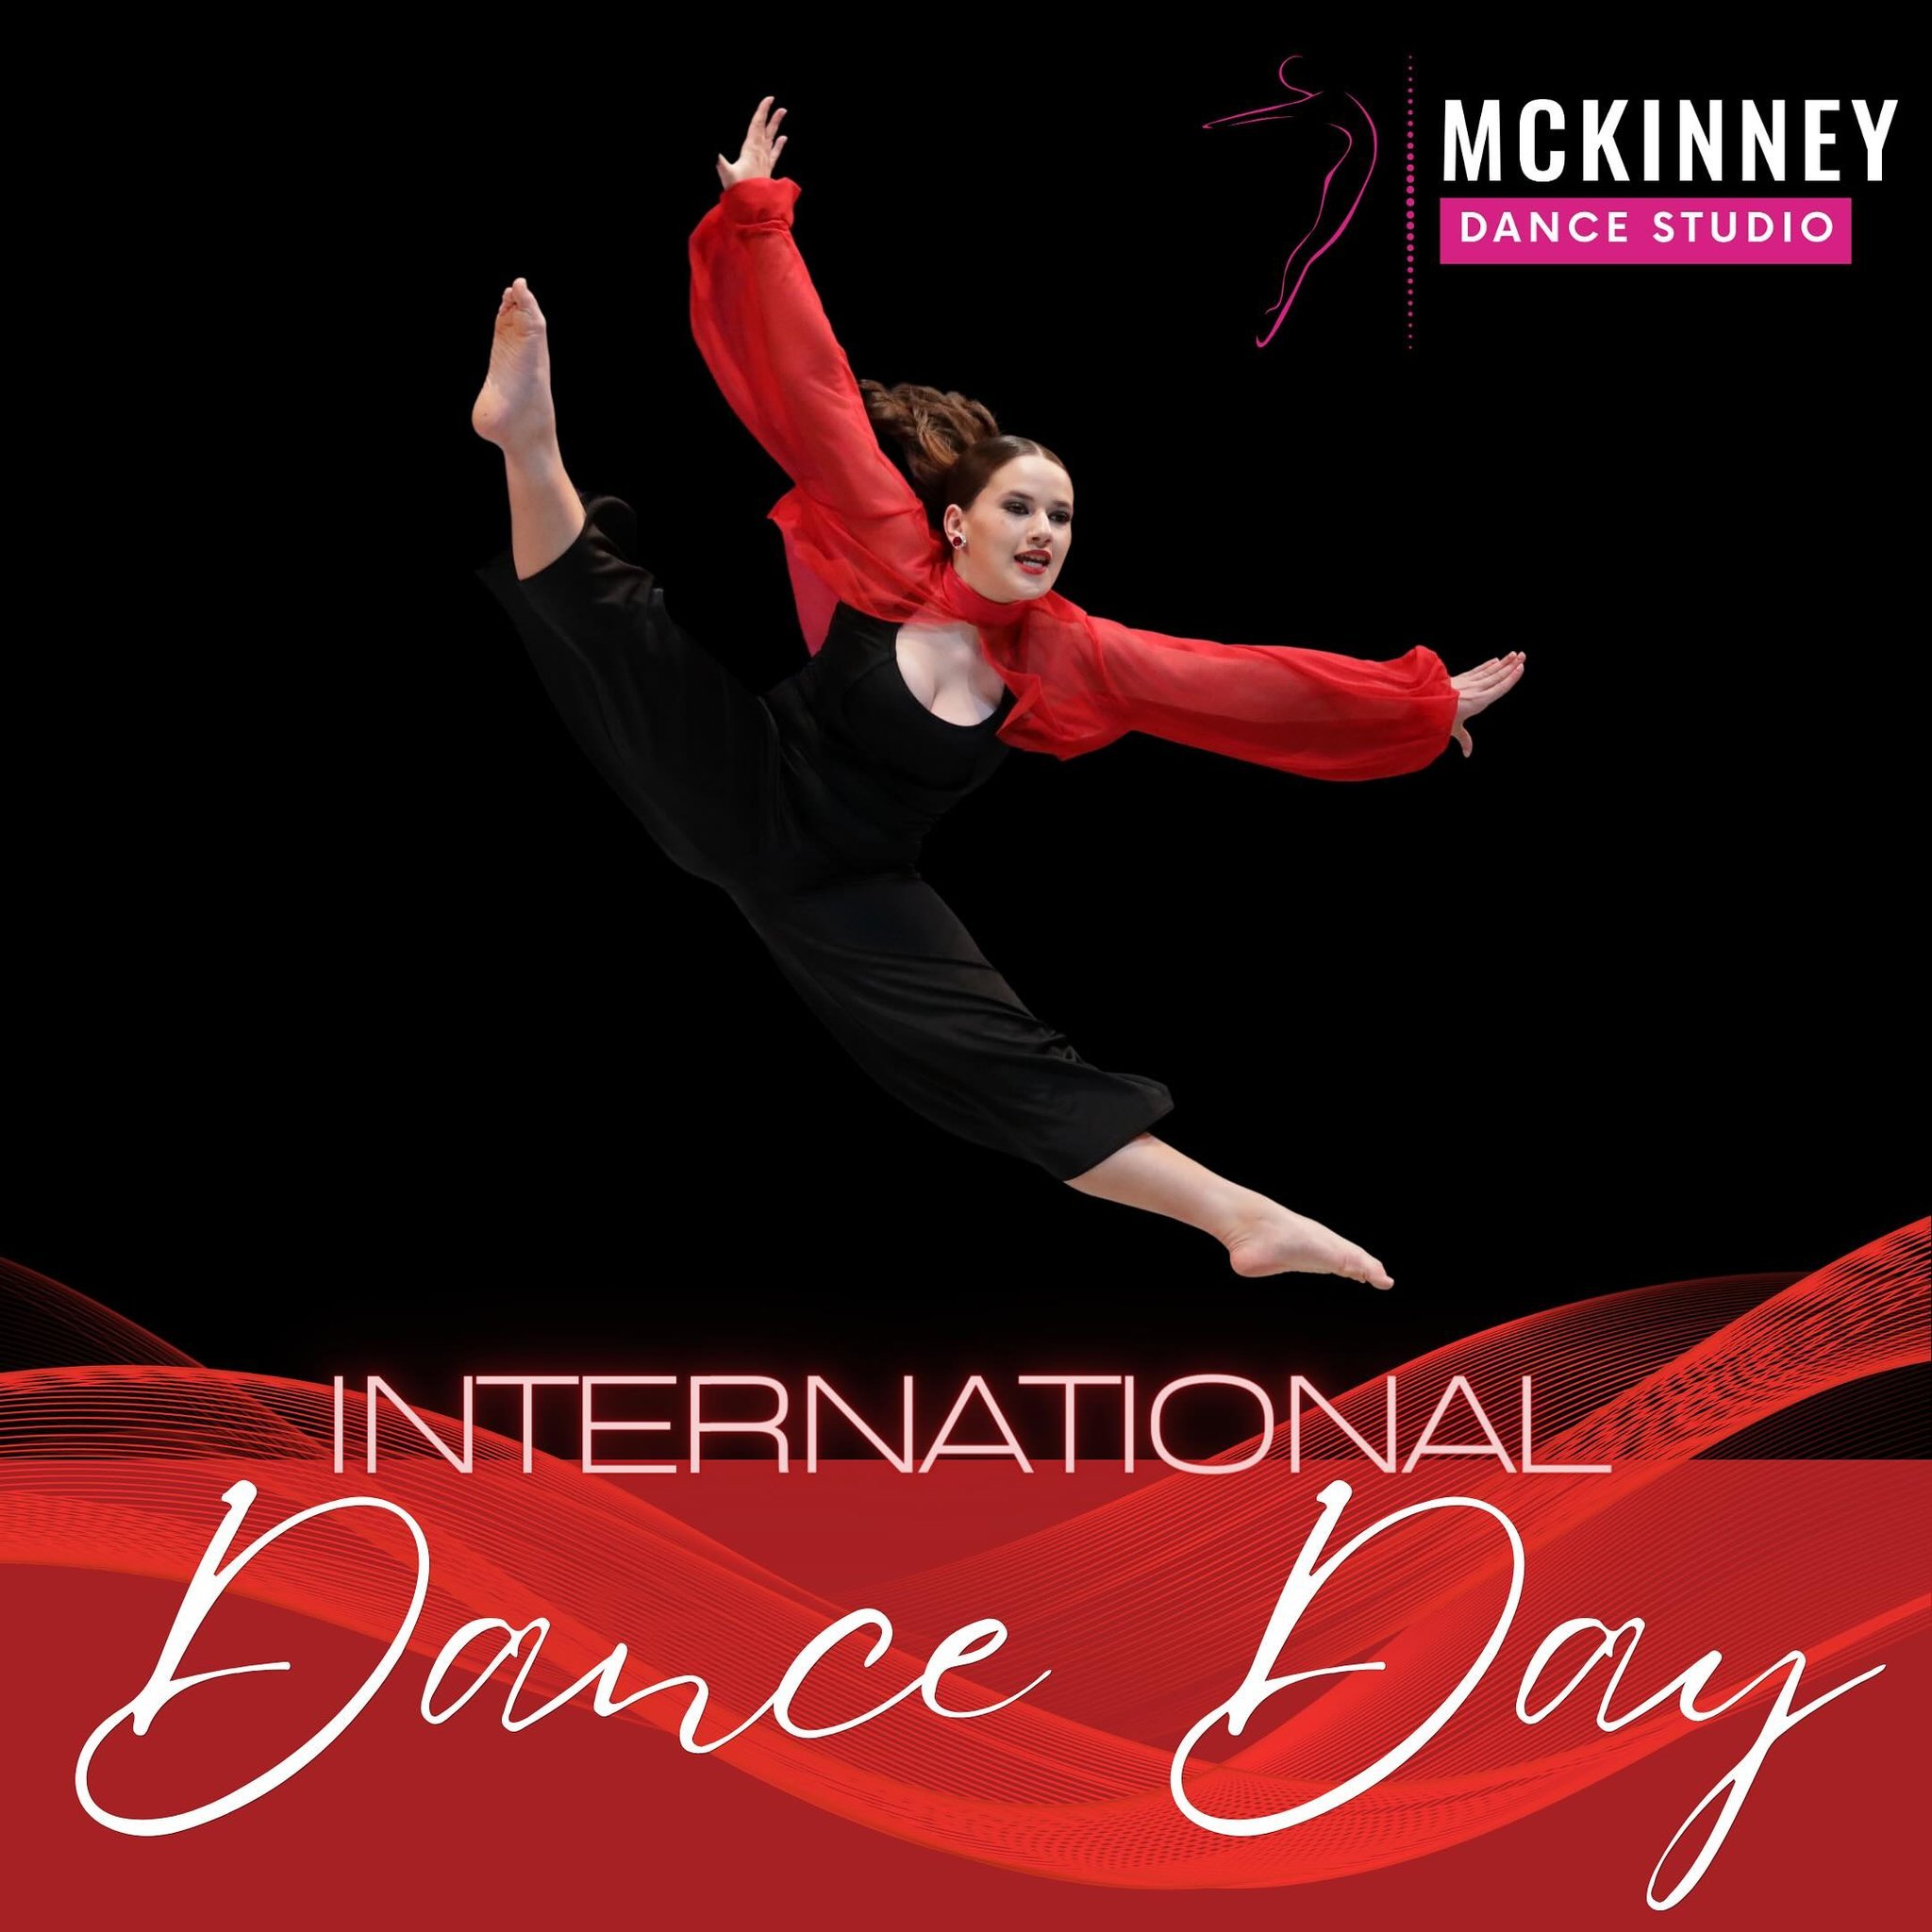 Happy International Dance Day! ❤️✨

#passionartistrydance #discovertheartistwithin #allendancestudio #mckinneydancestudio #friscodancestudio #thedancestudionetwork